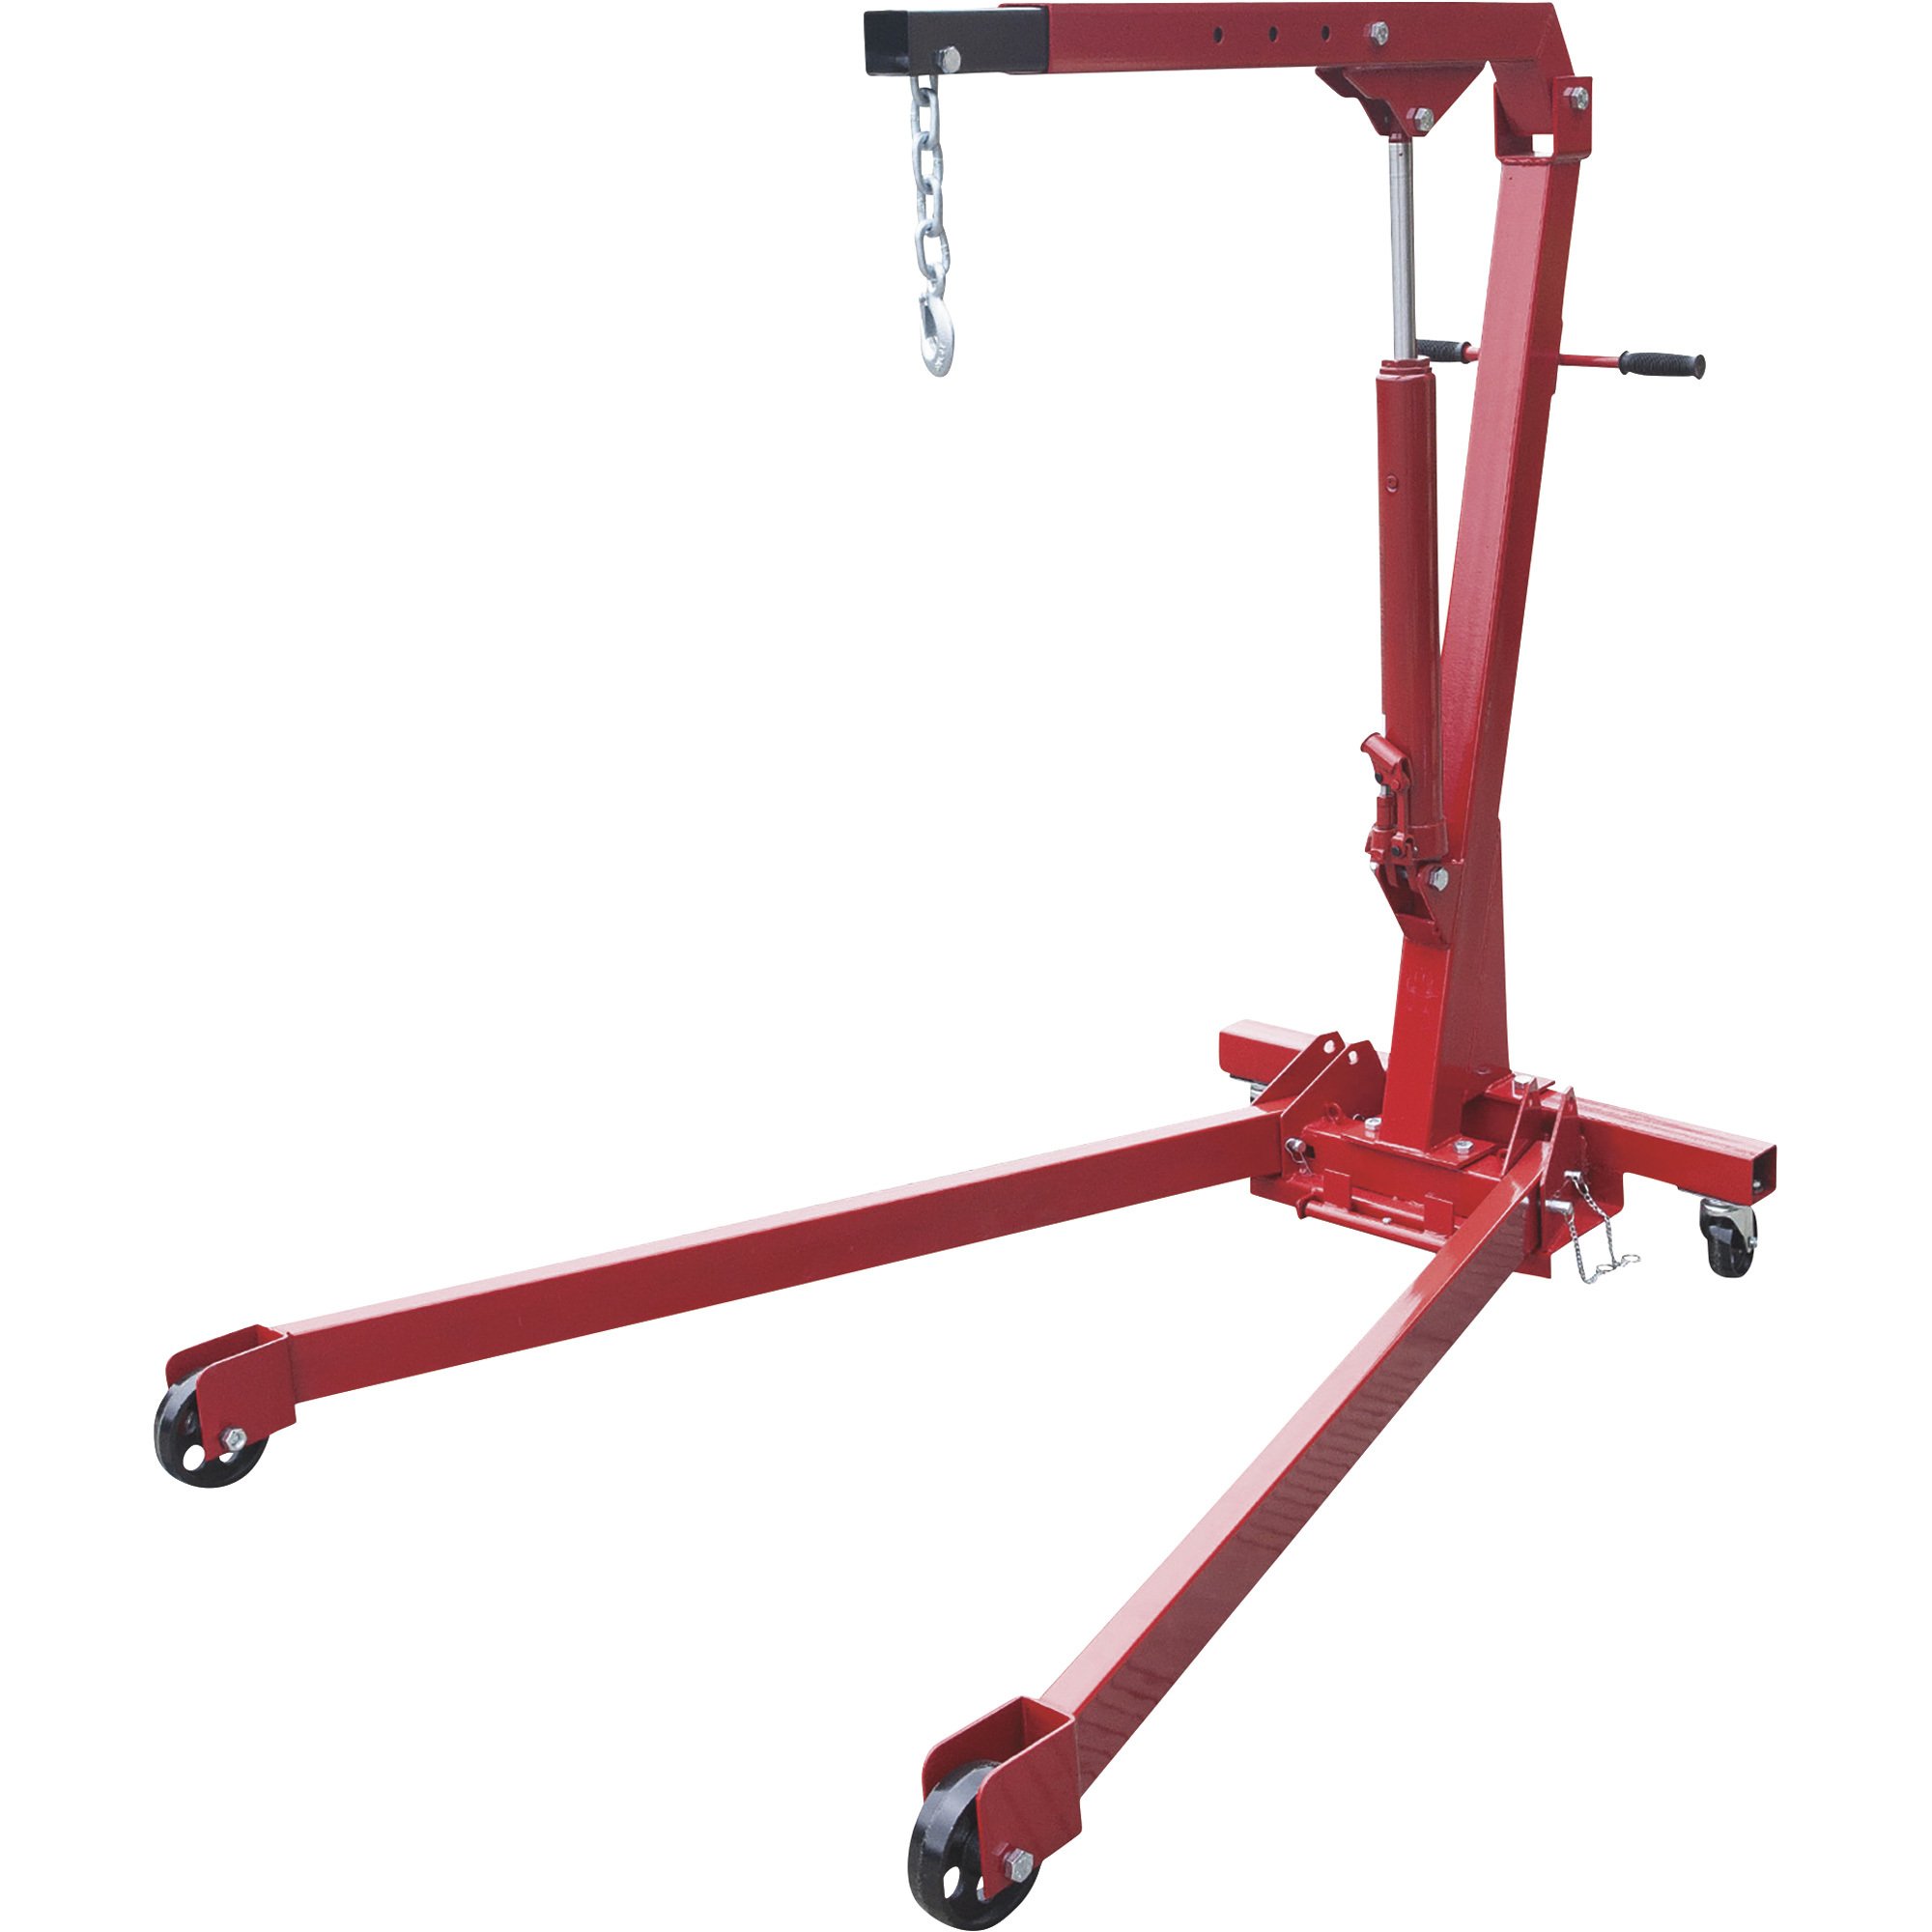 Torin Big Red Folding Engine Hoist with FREE* Engine Stand — 2-Ton